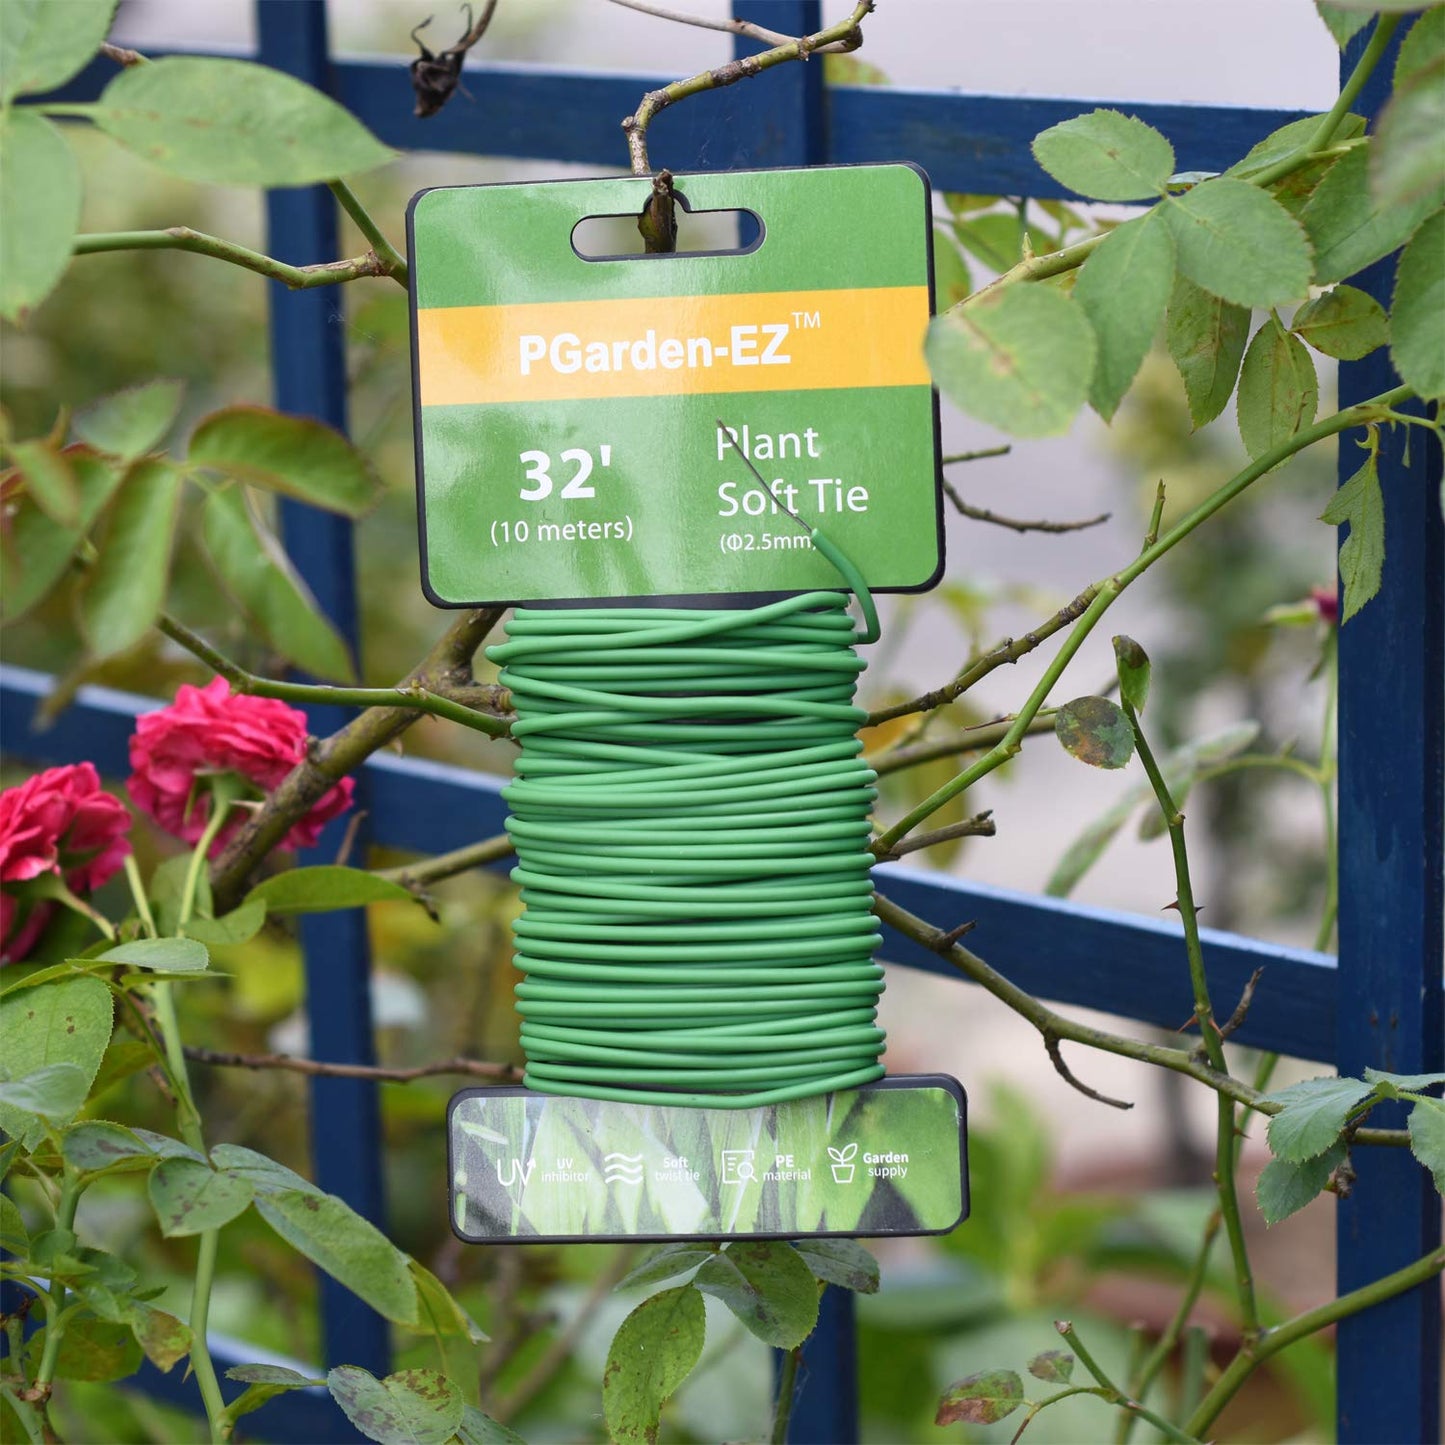 Plant Ties - 32.8ft Soft Twist Ties Green TPR Garden Ties Supply, for Supporting Plants Tomatoes Office Home Organizing